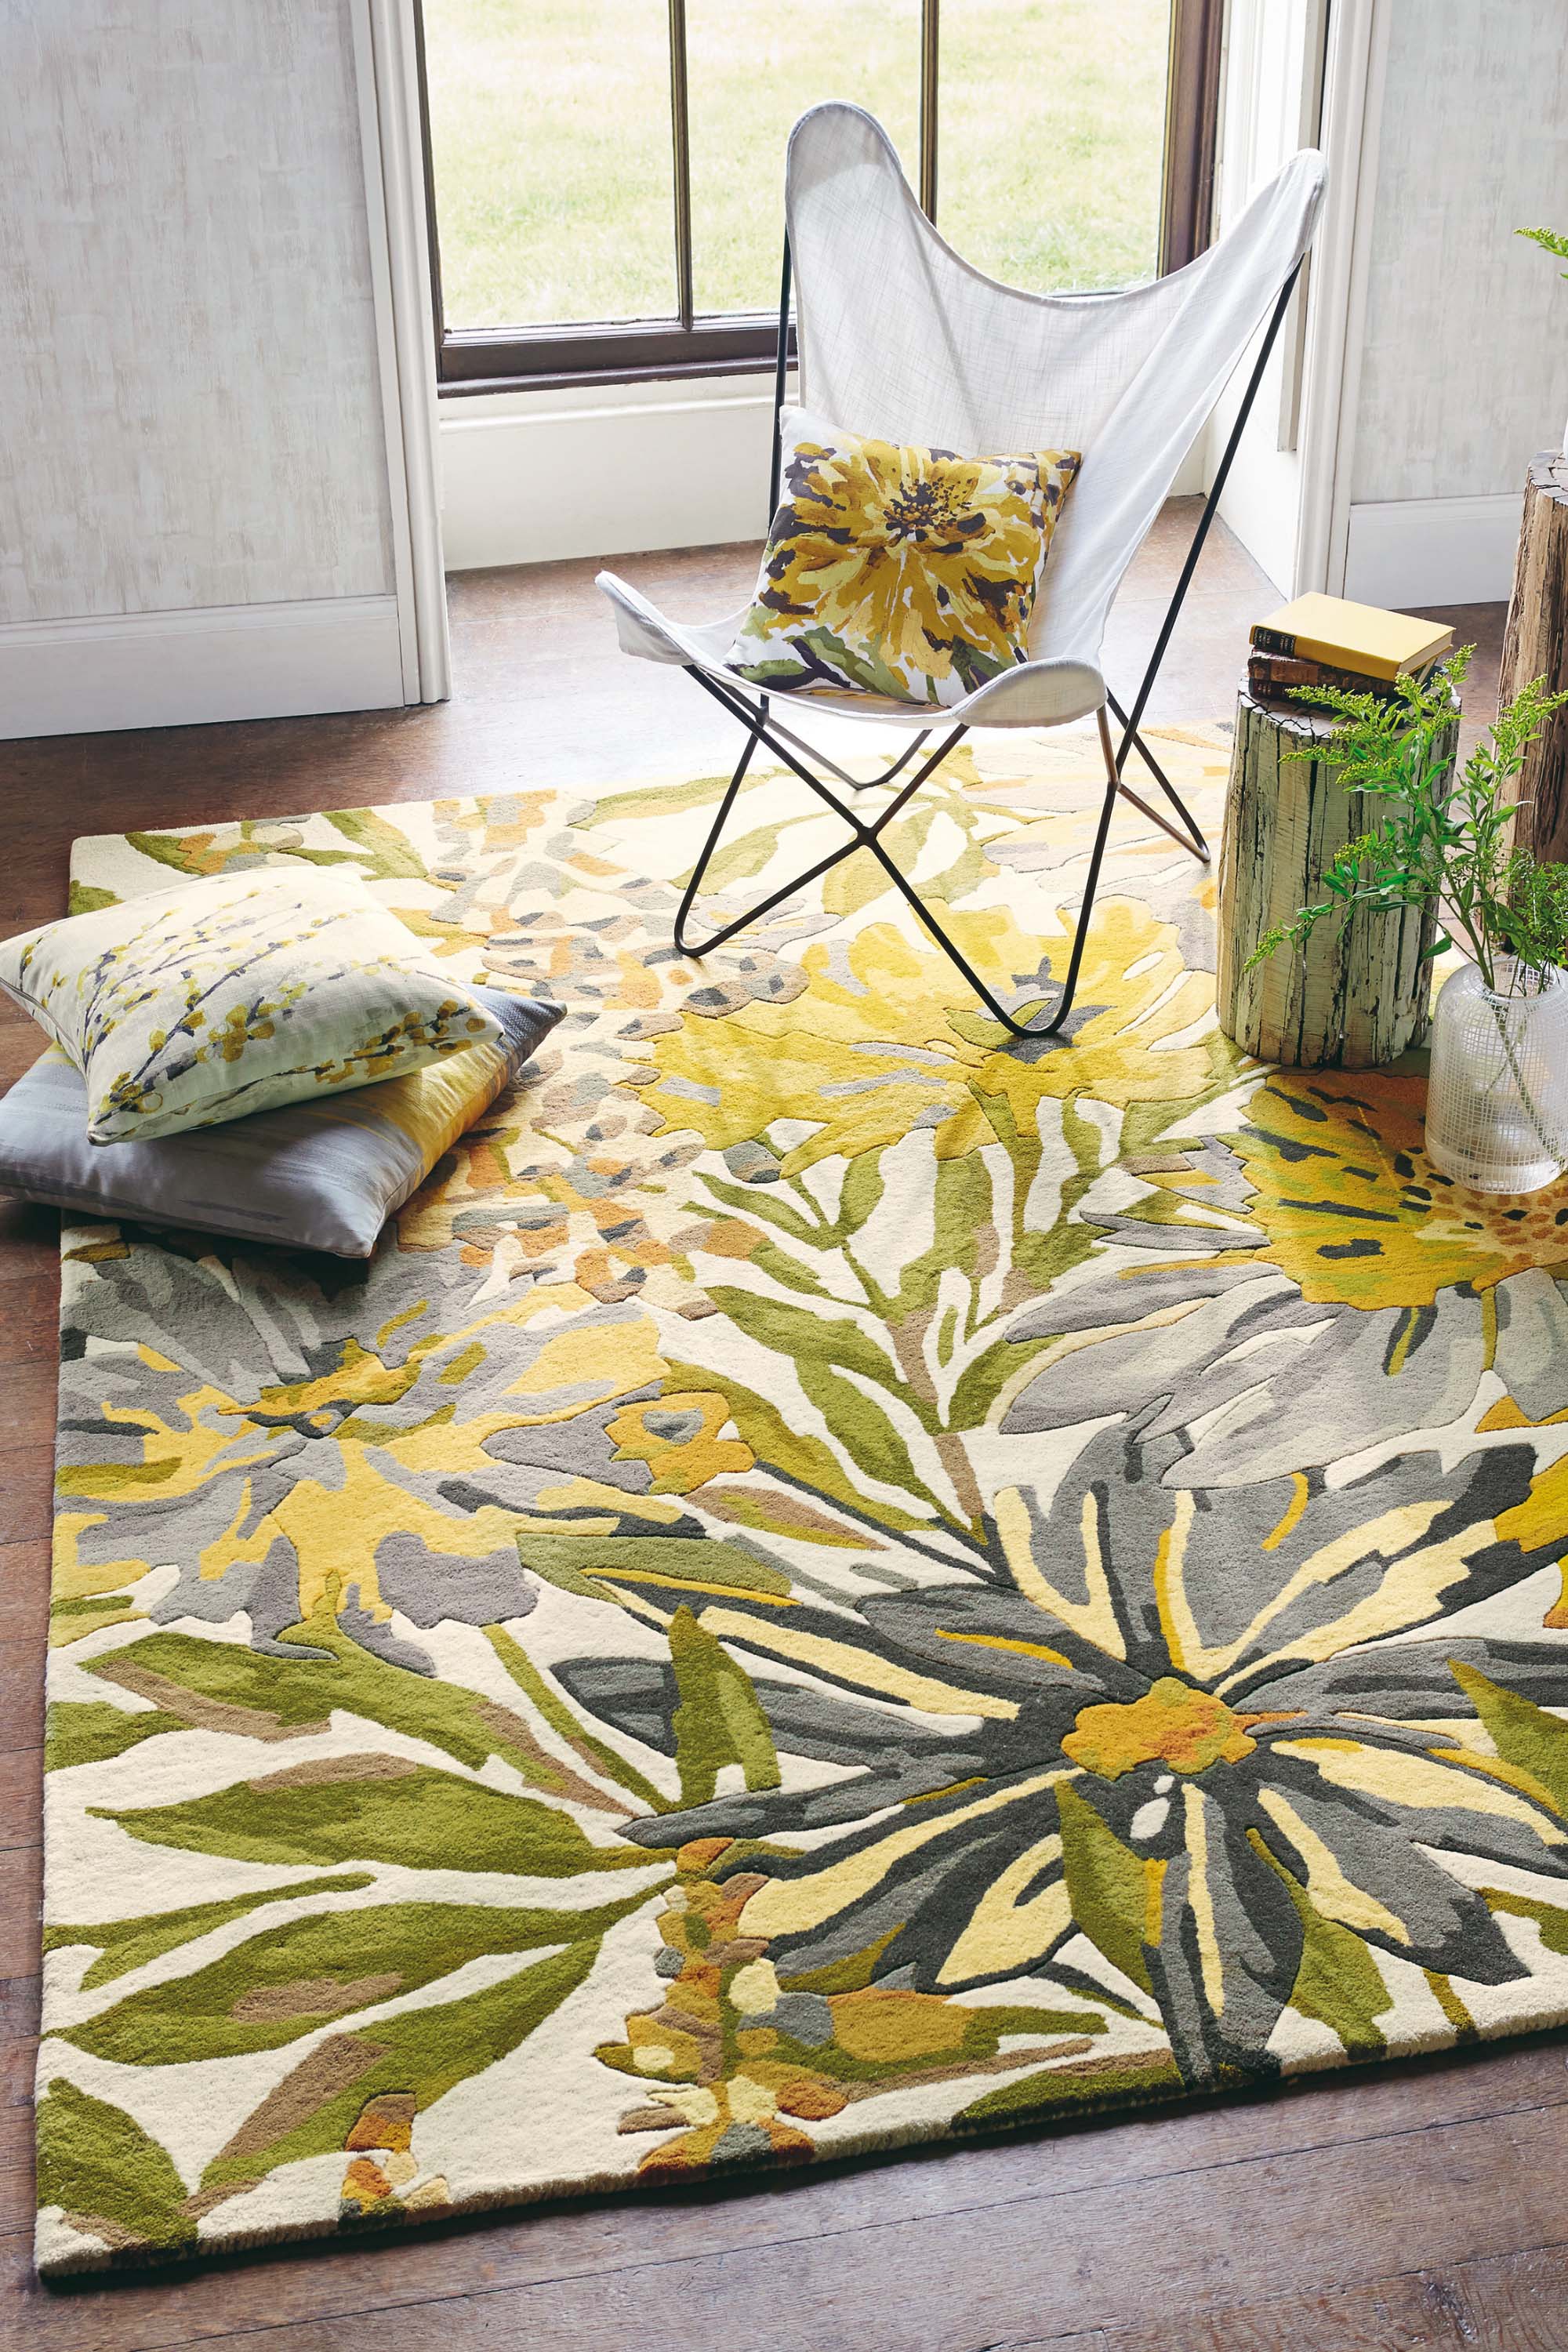 Rectangular white wool rug with yellow, green and brown leaves and flowers